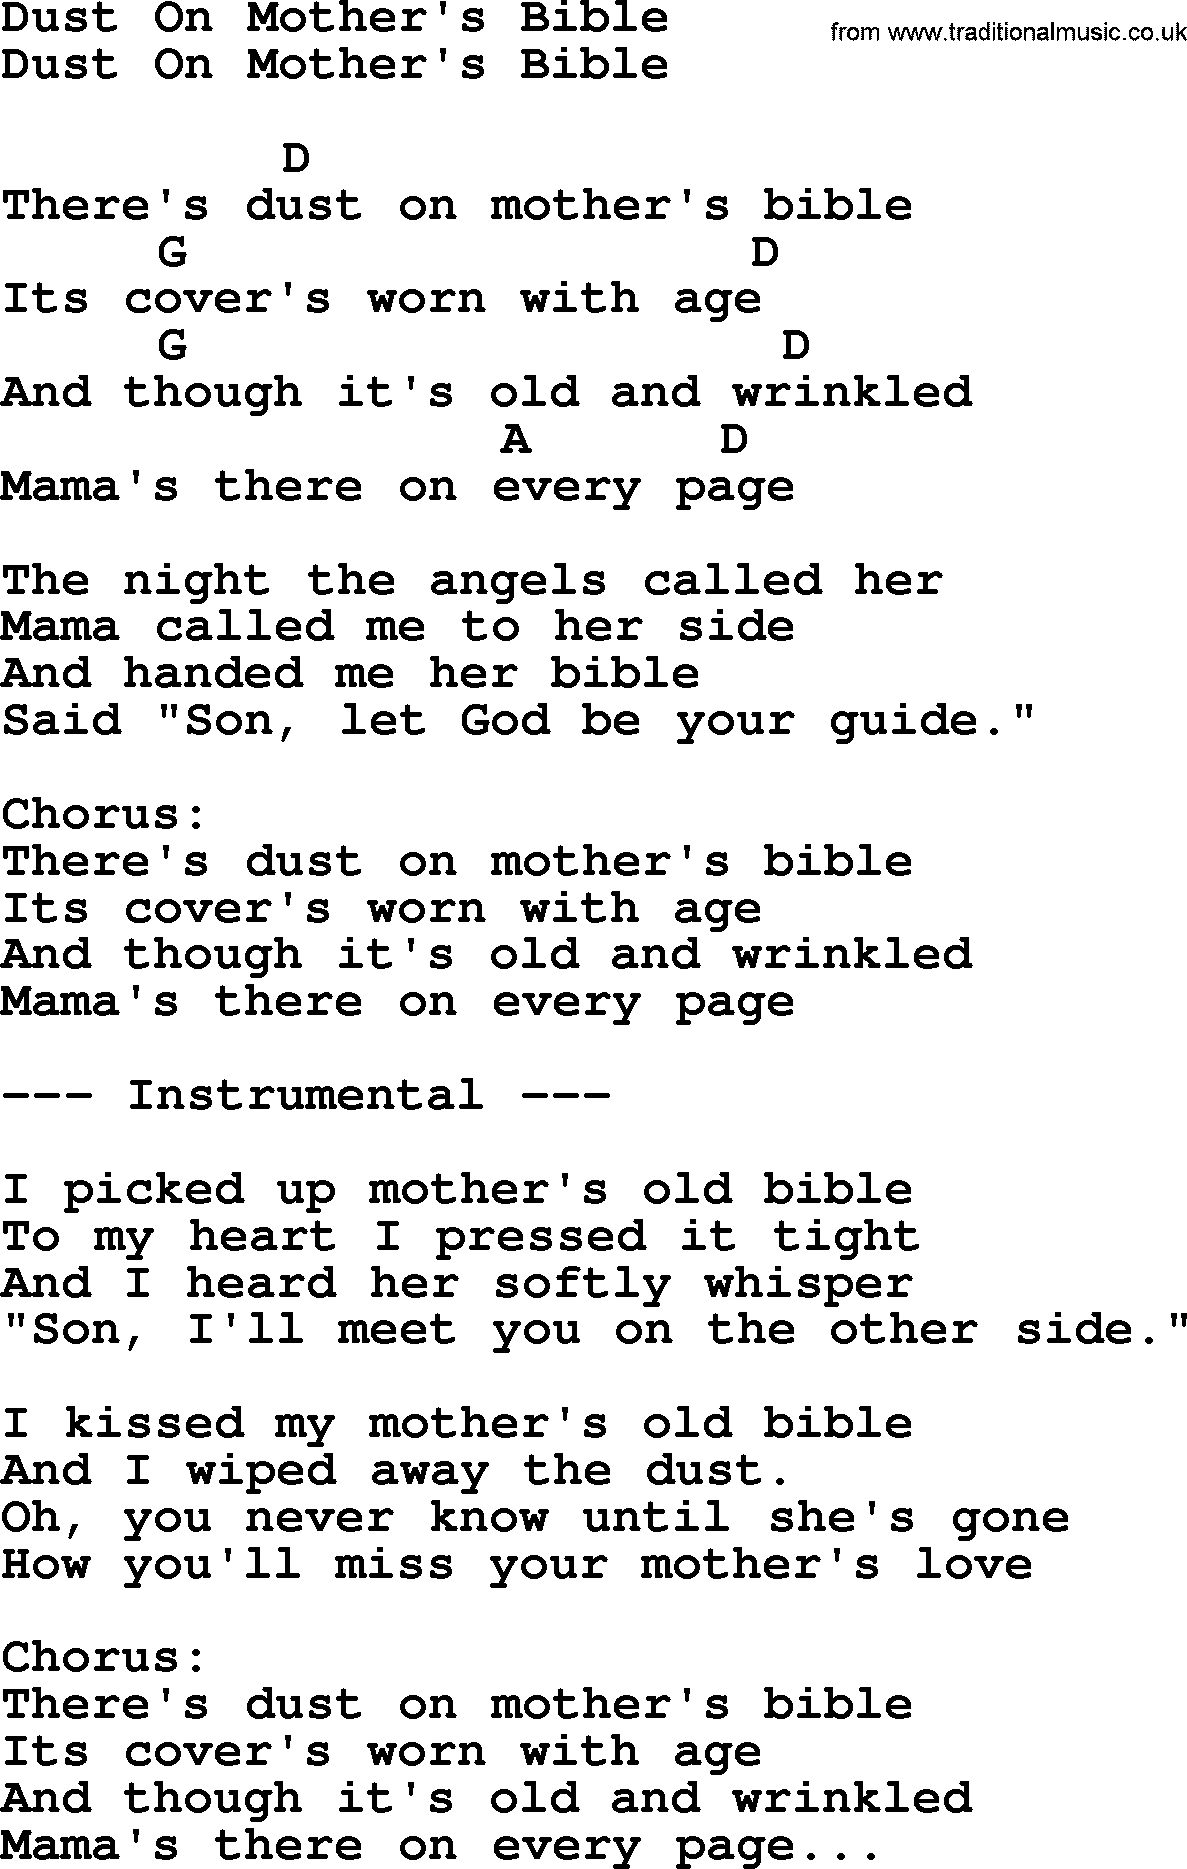 Bluegrass song: Dust On Mother's Bible, lyrics and chords